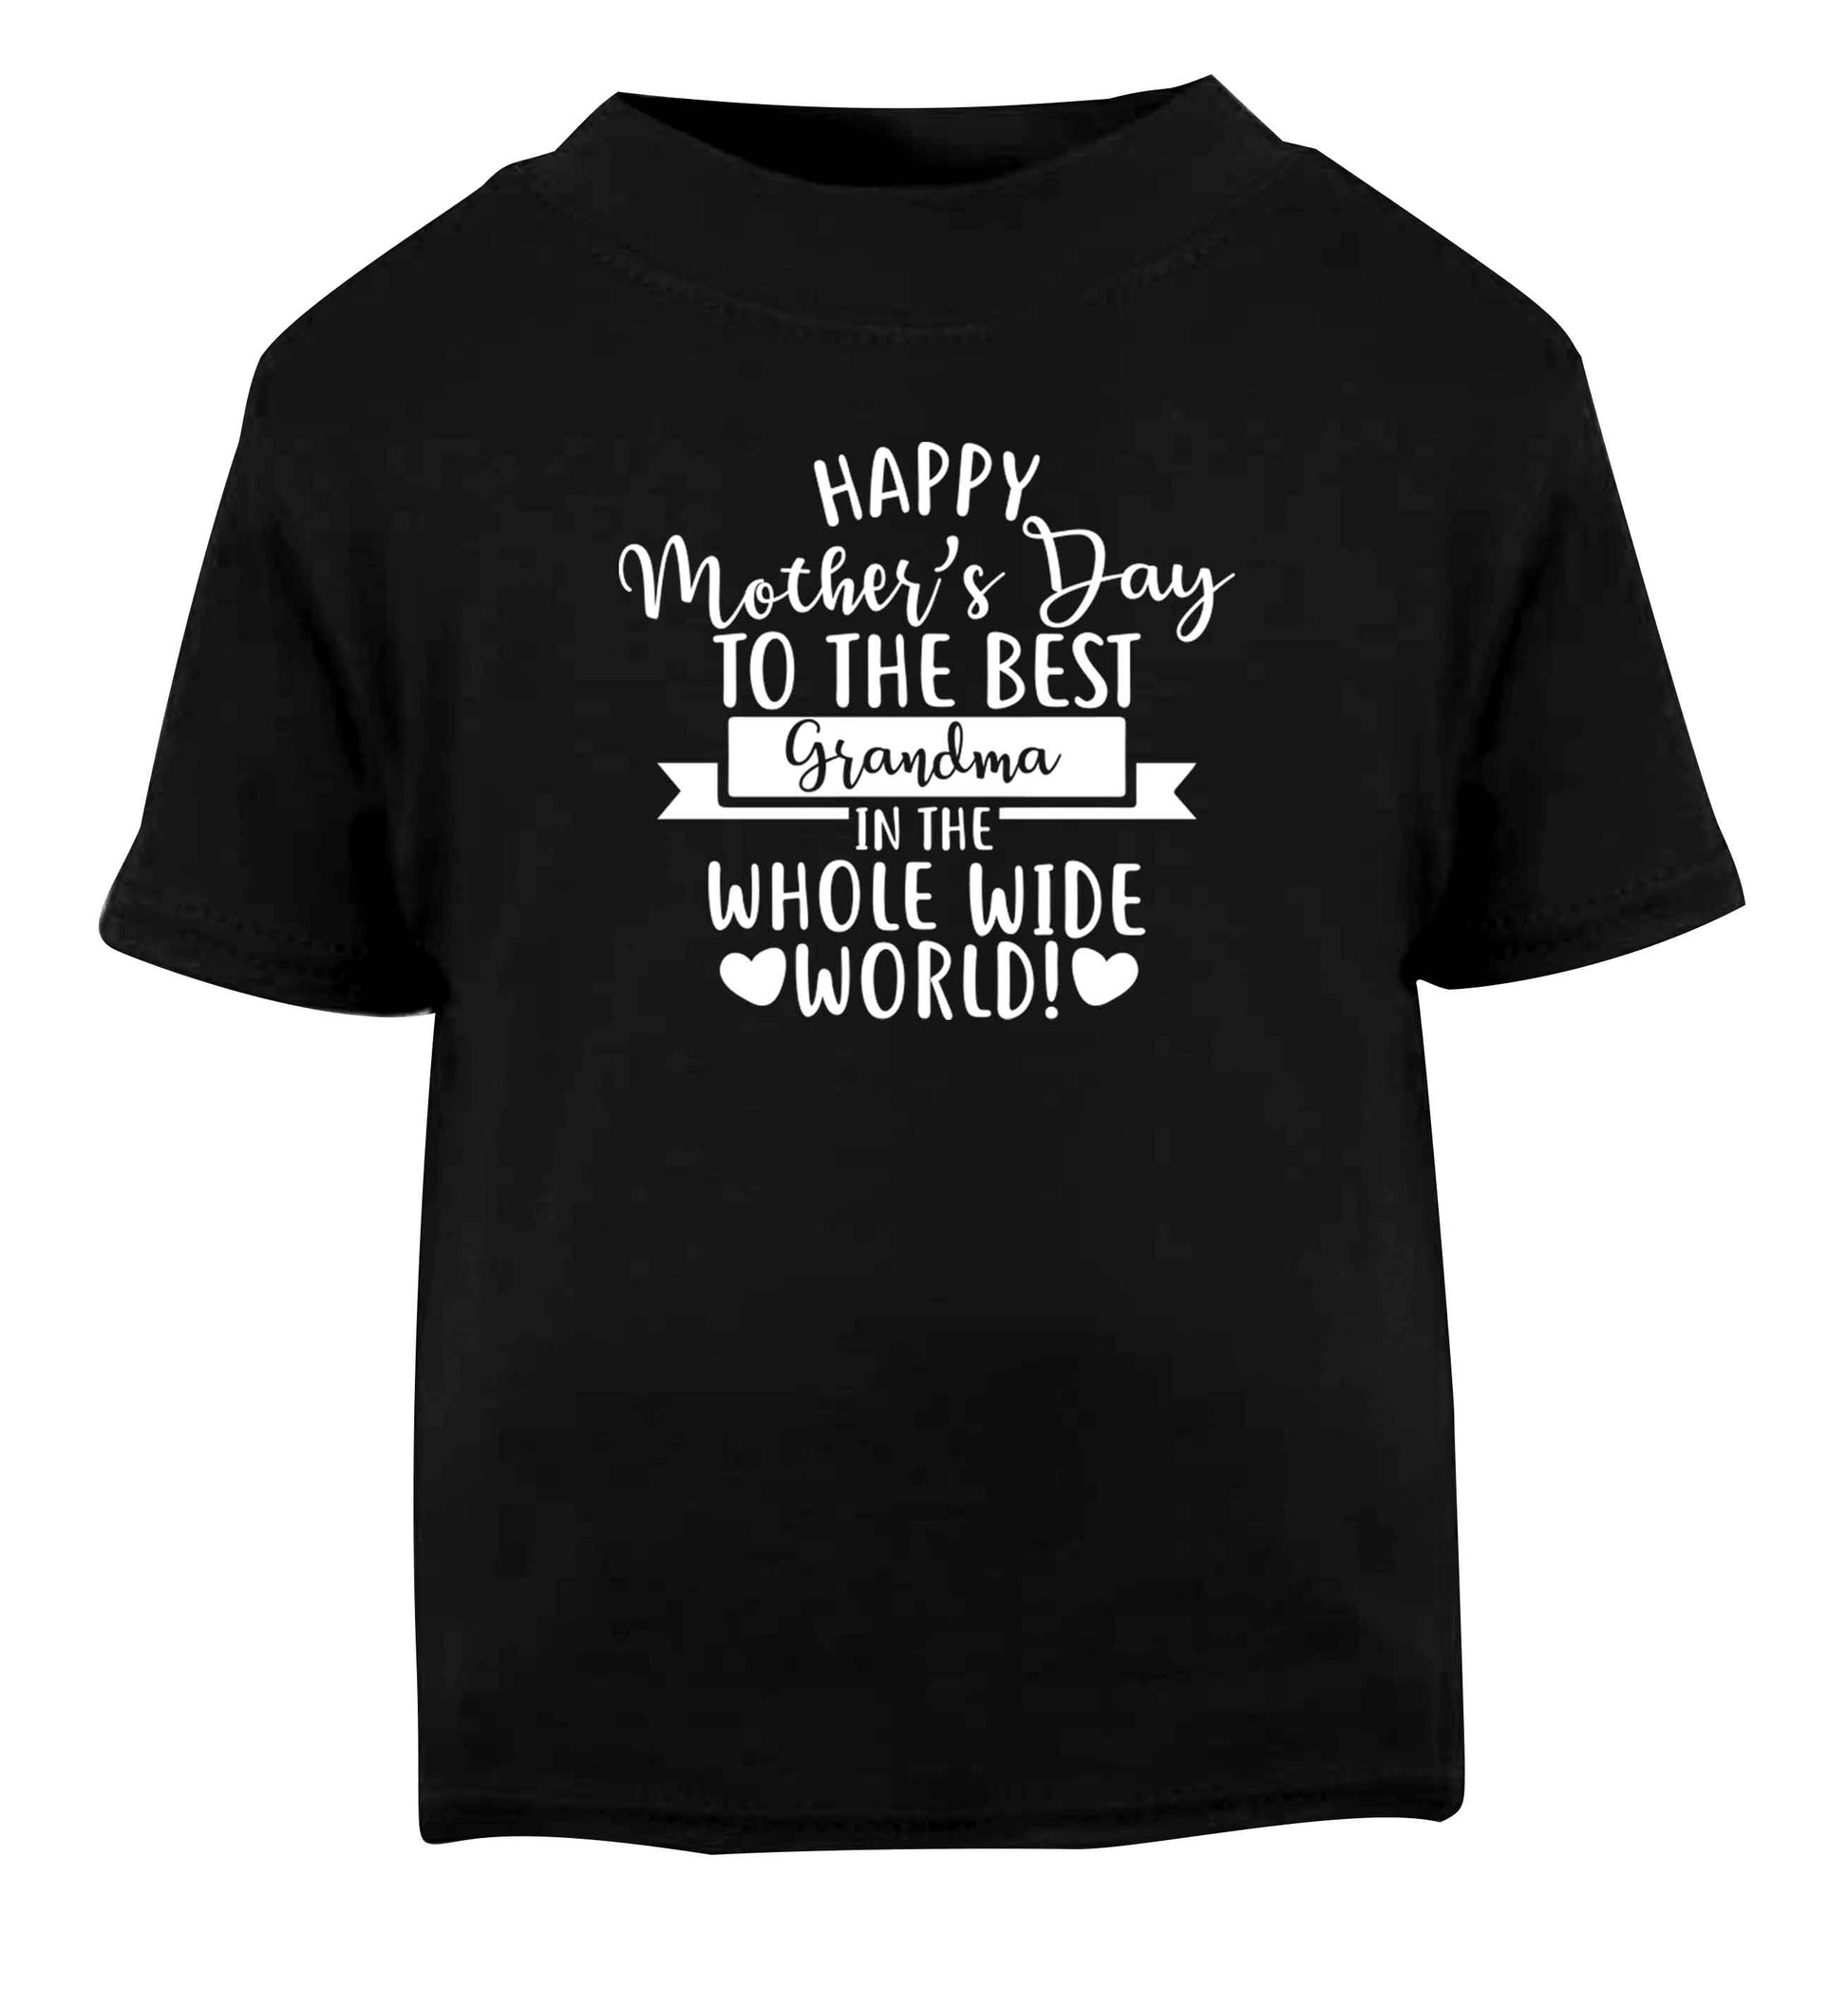 Happy mother's day to the best grandma in the world Black baby toddler Tshirt 2 years